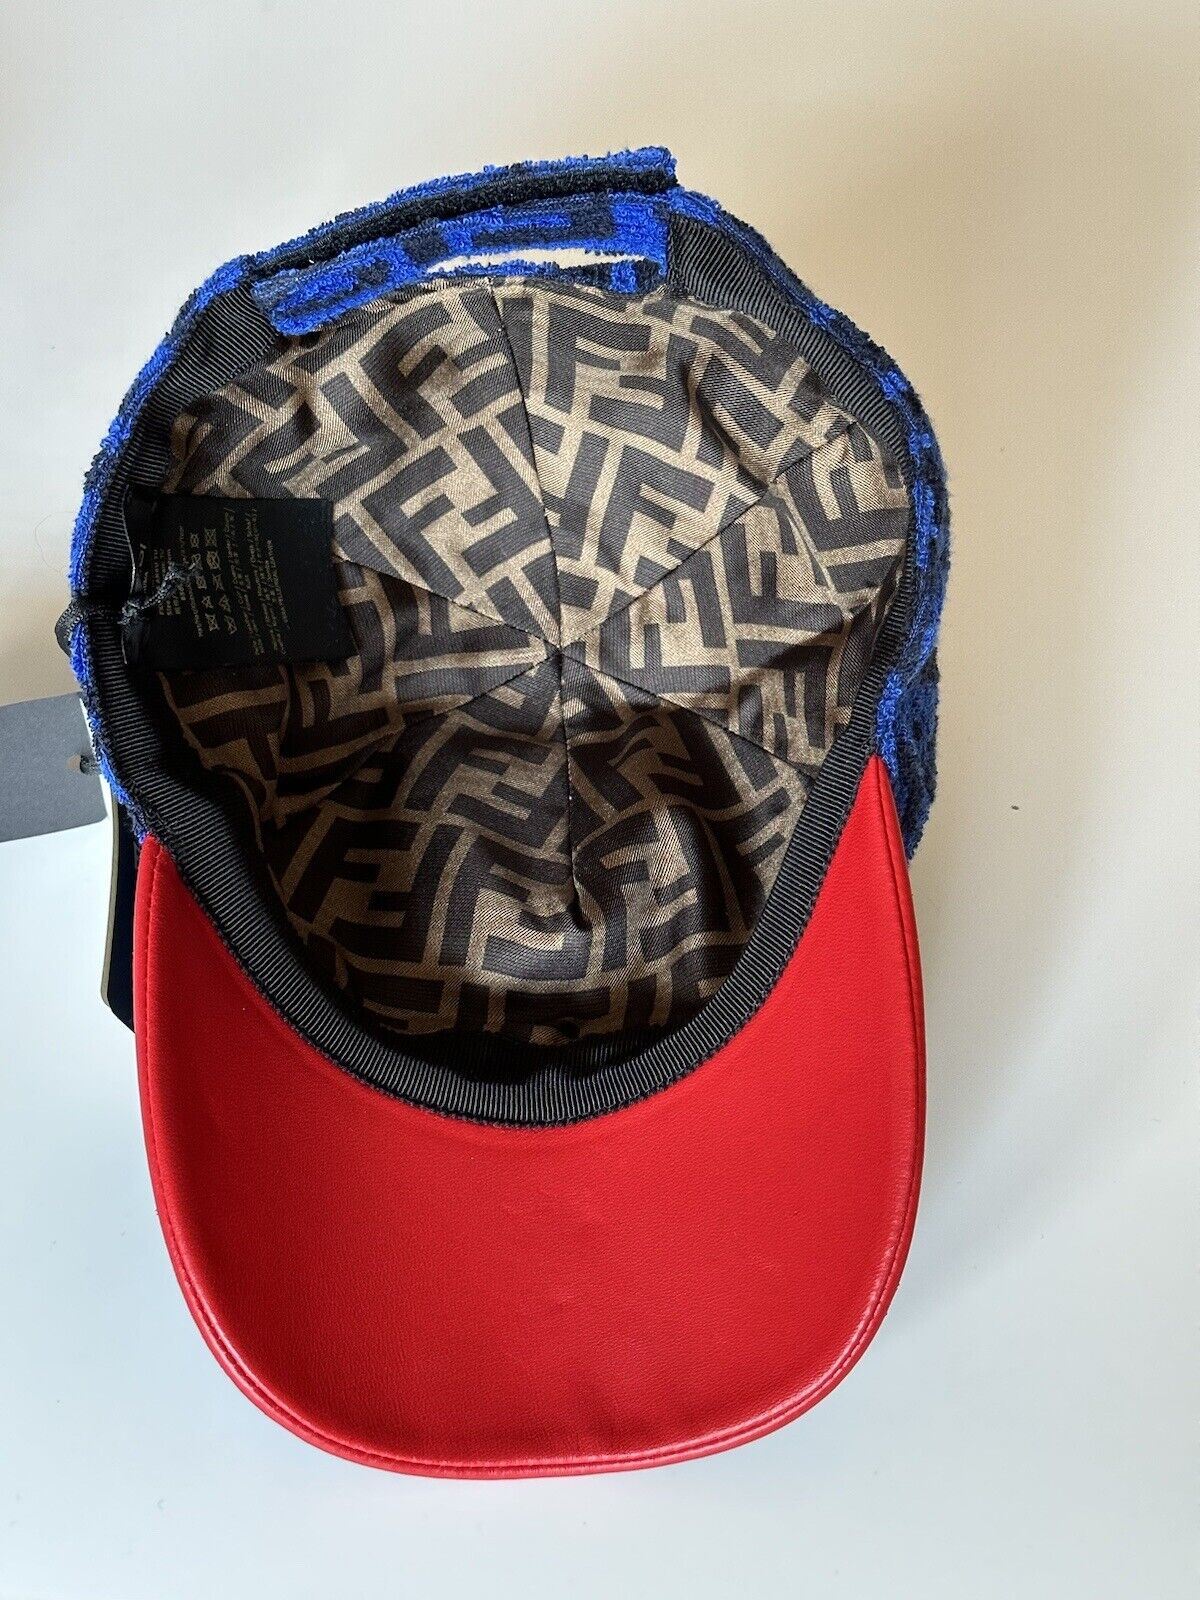 NWT $530 Fendi Terry Cloth Baseball Cap Blue/Red Hat Made in Italy FXQ776